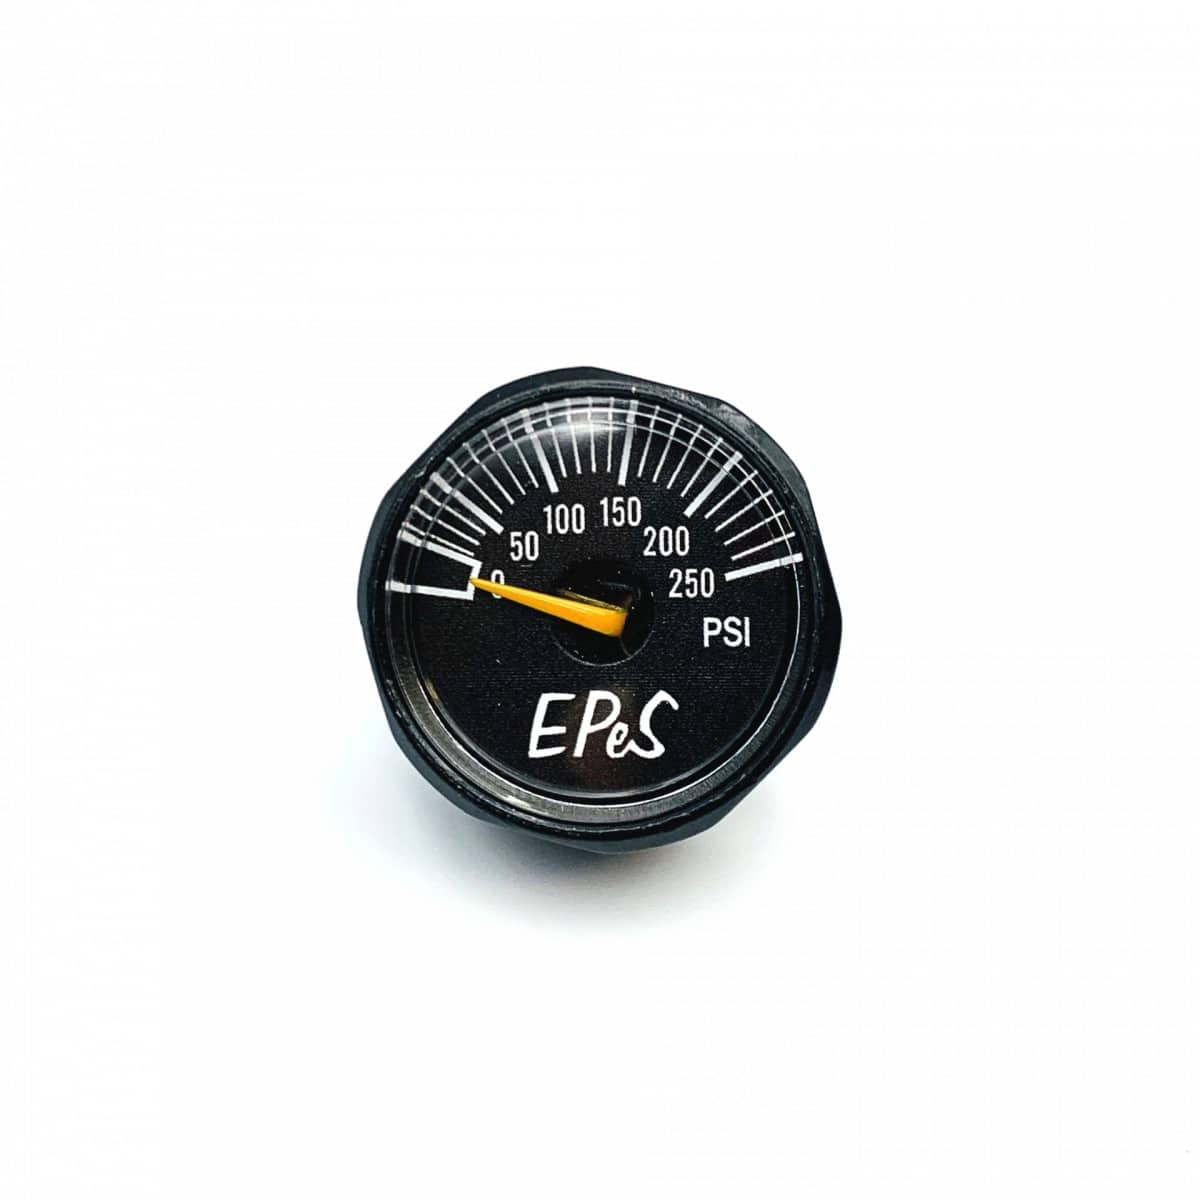 EPES 250 PSI Small pressure gauge - 1/8 NPT